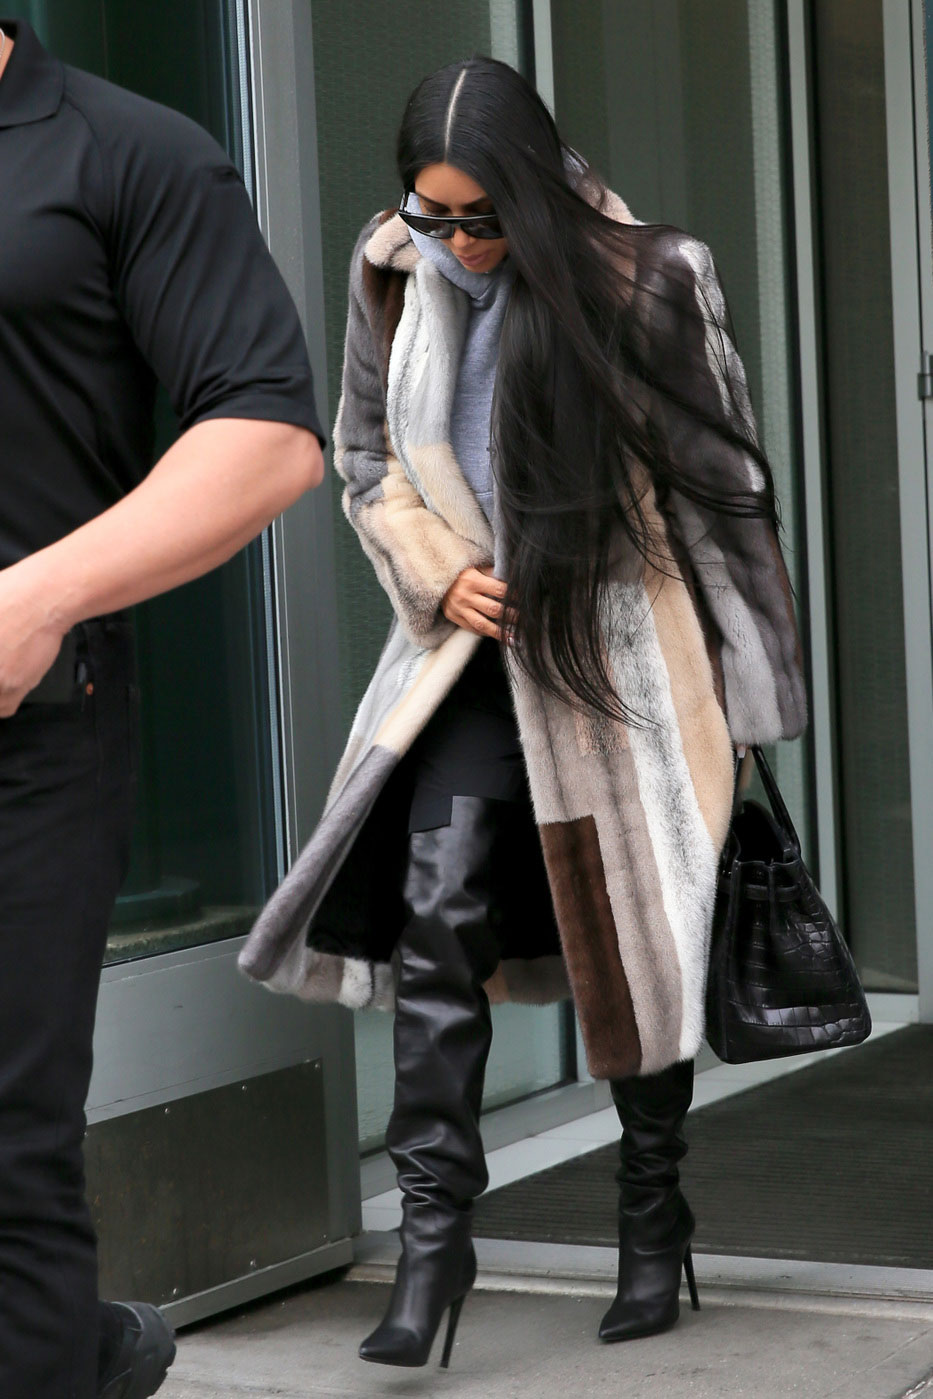 Shop Kim Kardashian's multi-color fur coat, hooded sweatshirt and over-the-knee boots look for less.